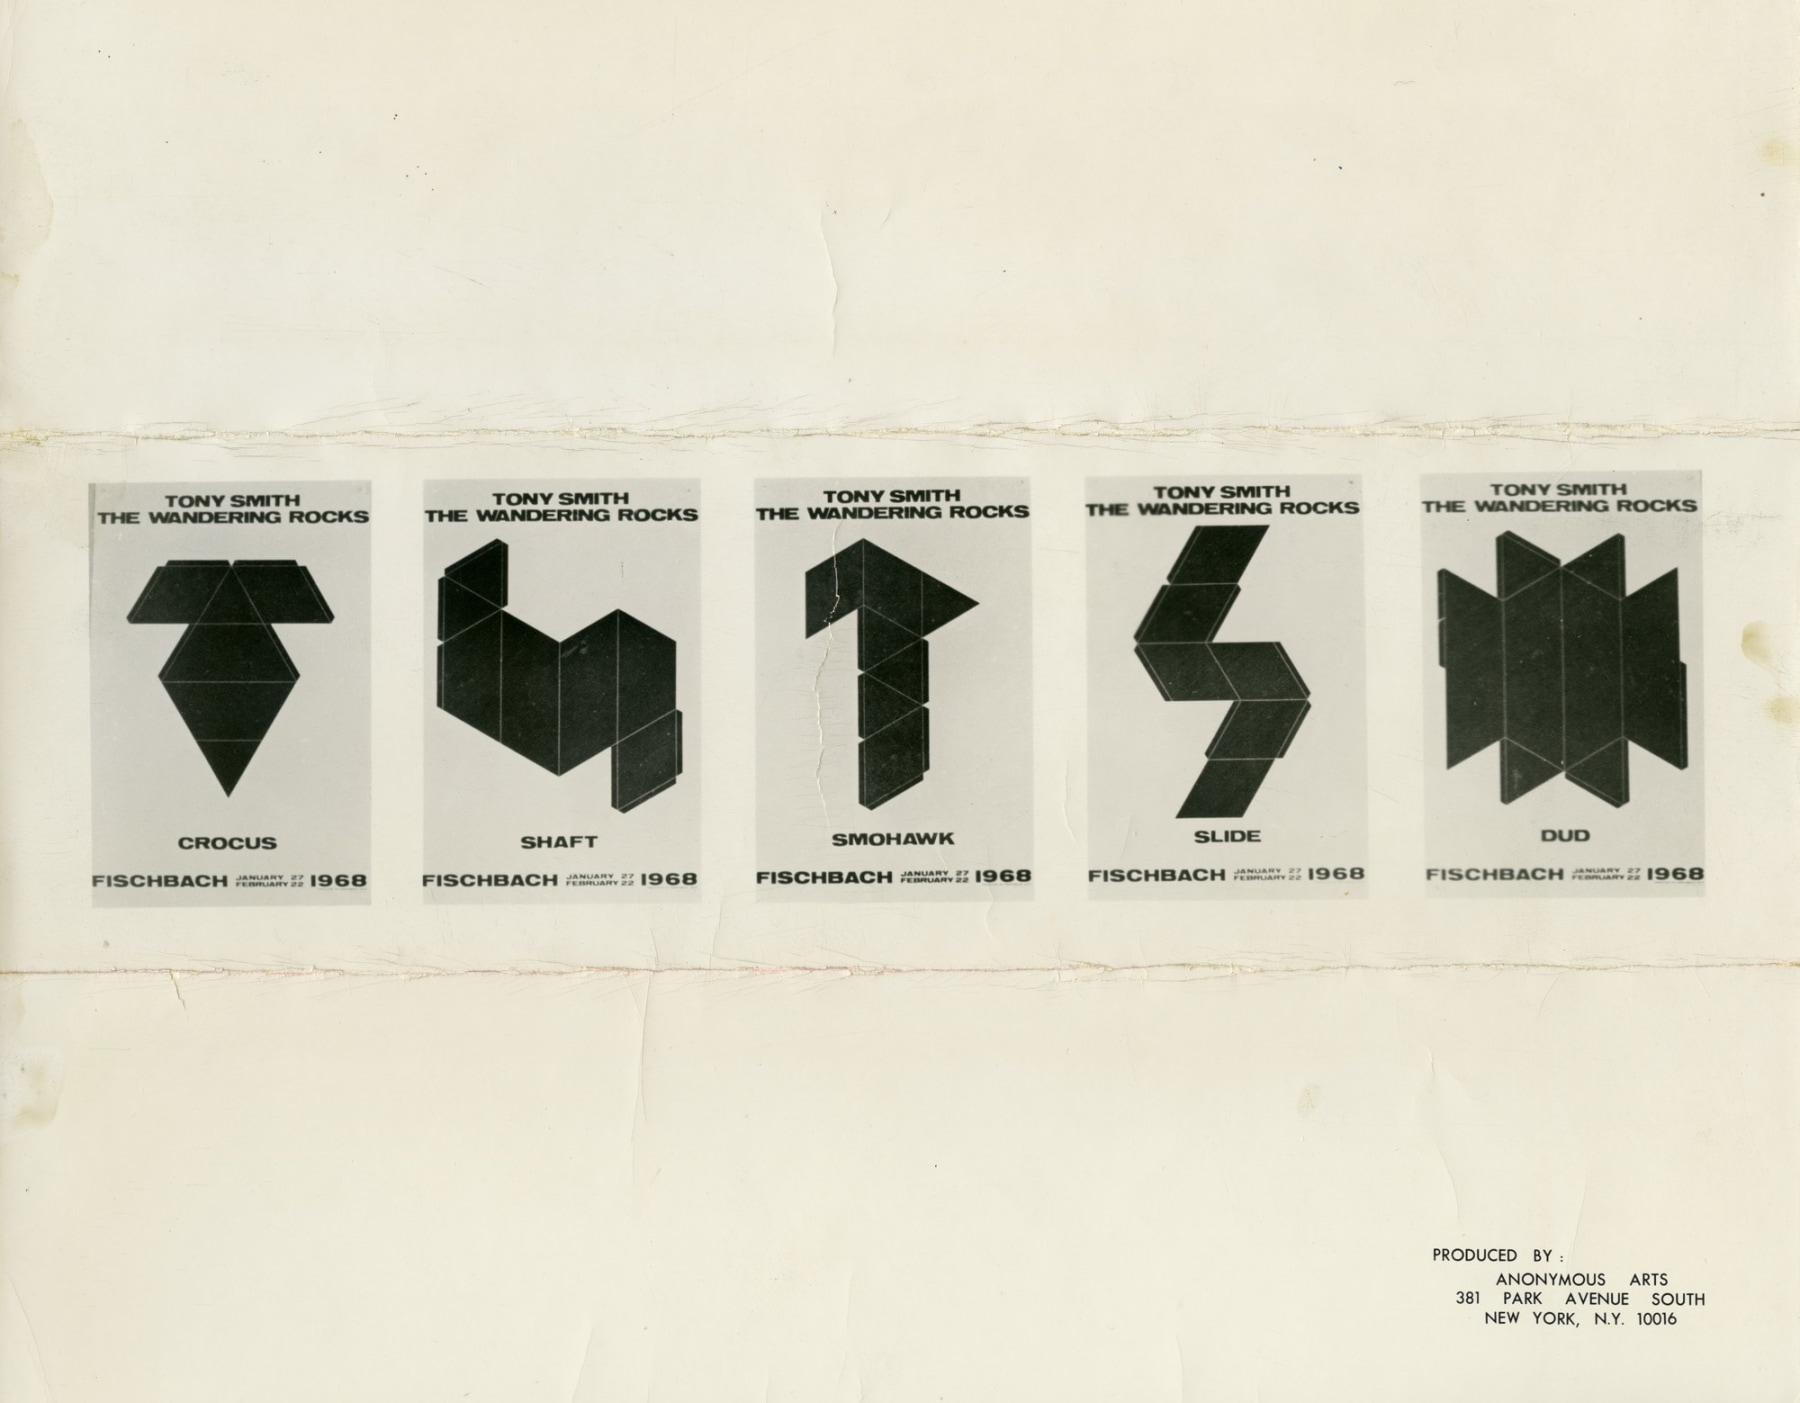 Poster (1968).&amp;nbsp;Accompanying&amp;nbsp;Tony Smith: The Wandering Rocks&amp;nbsp;(1968)
Designed by Tony Smith
Fischbach Gallery, New York